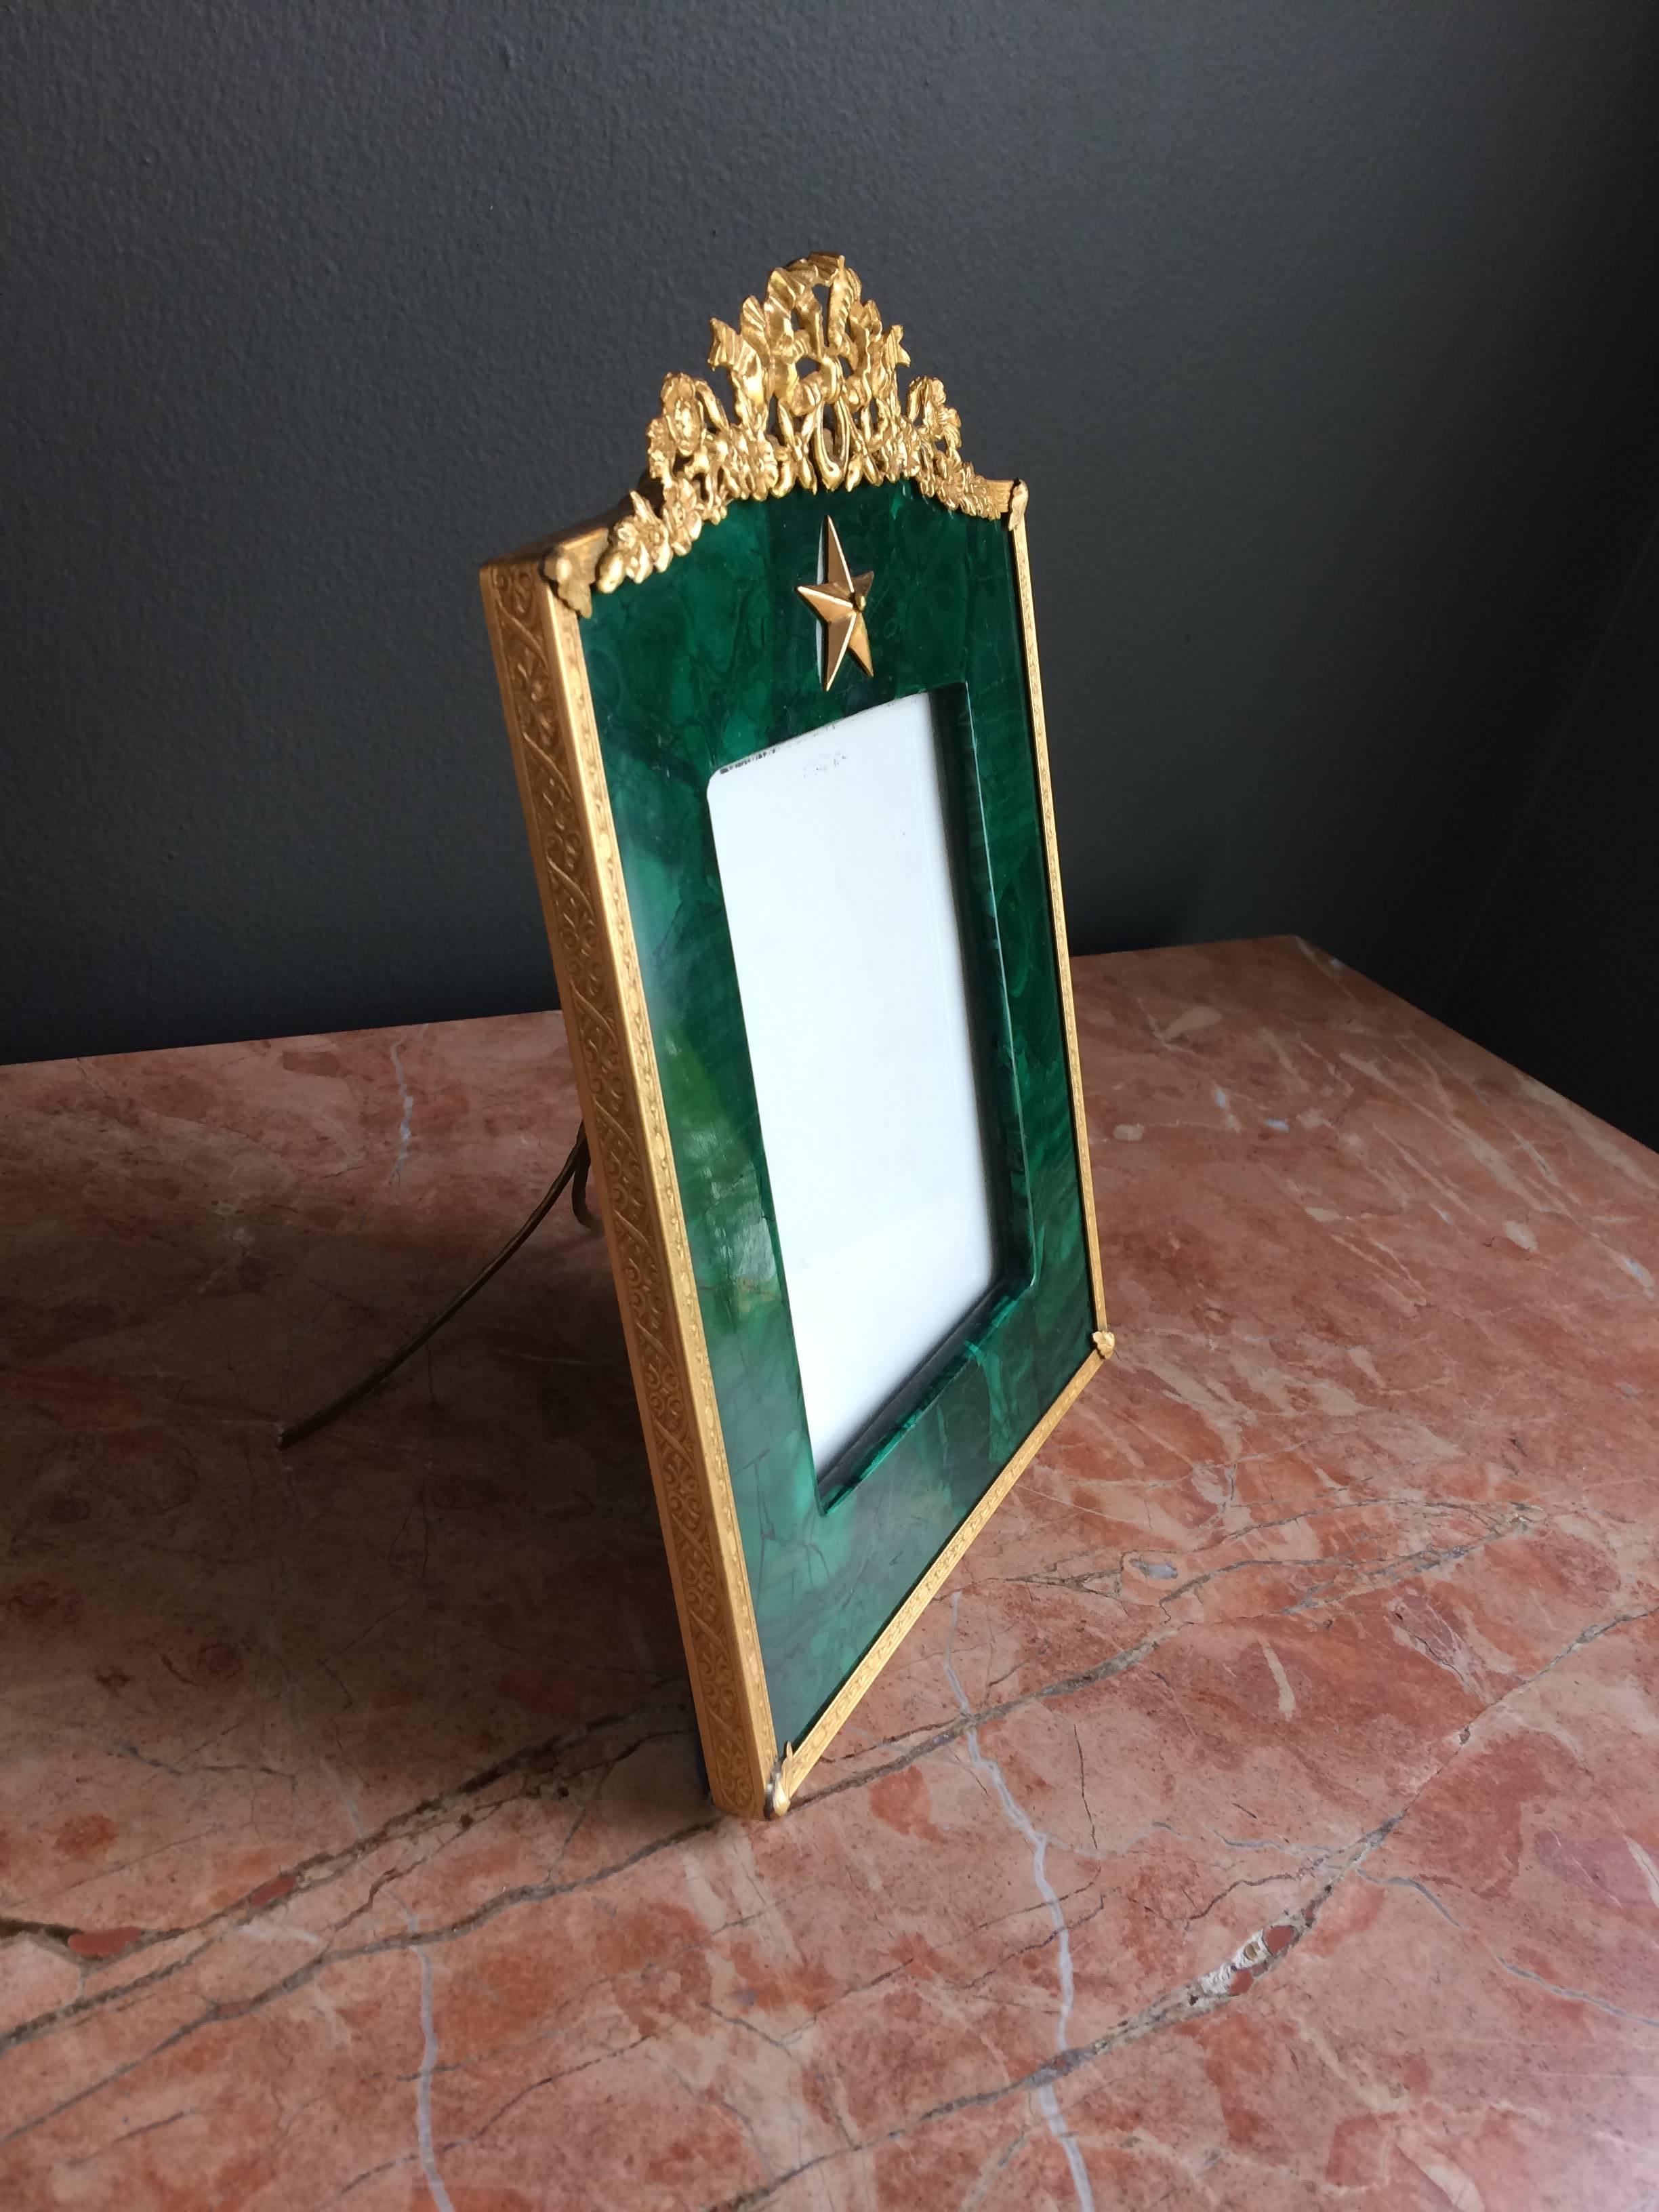 Empire style frame, bronze doré and malachite with rectangle opening.
 Measures: H 7 1/2" x W. 6 1/2".

